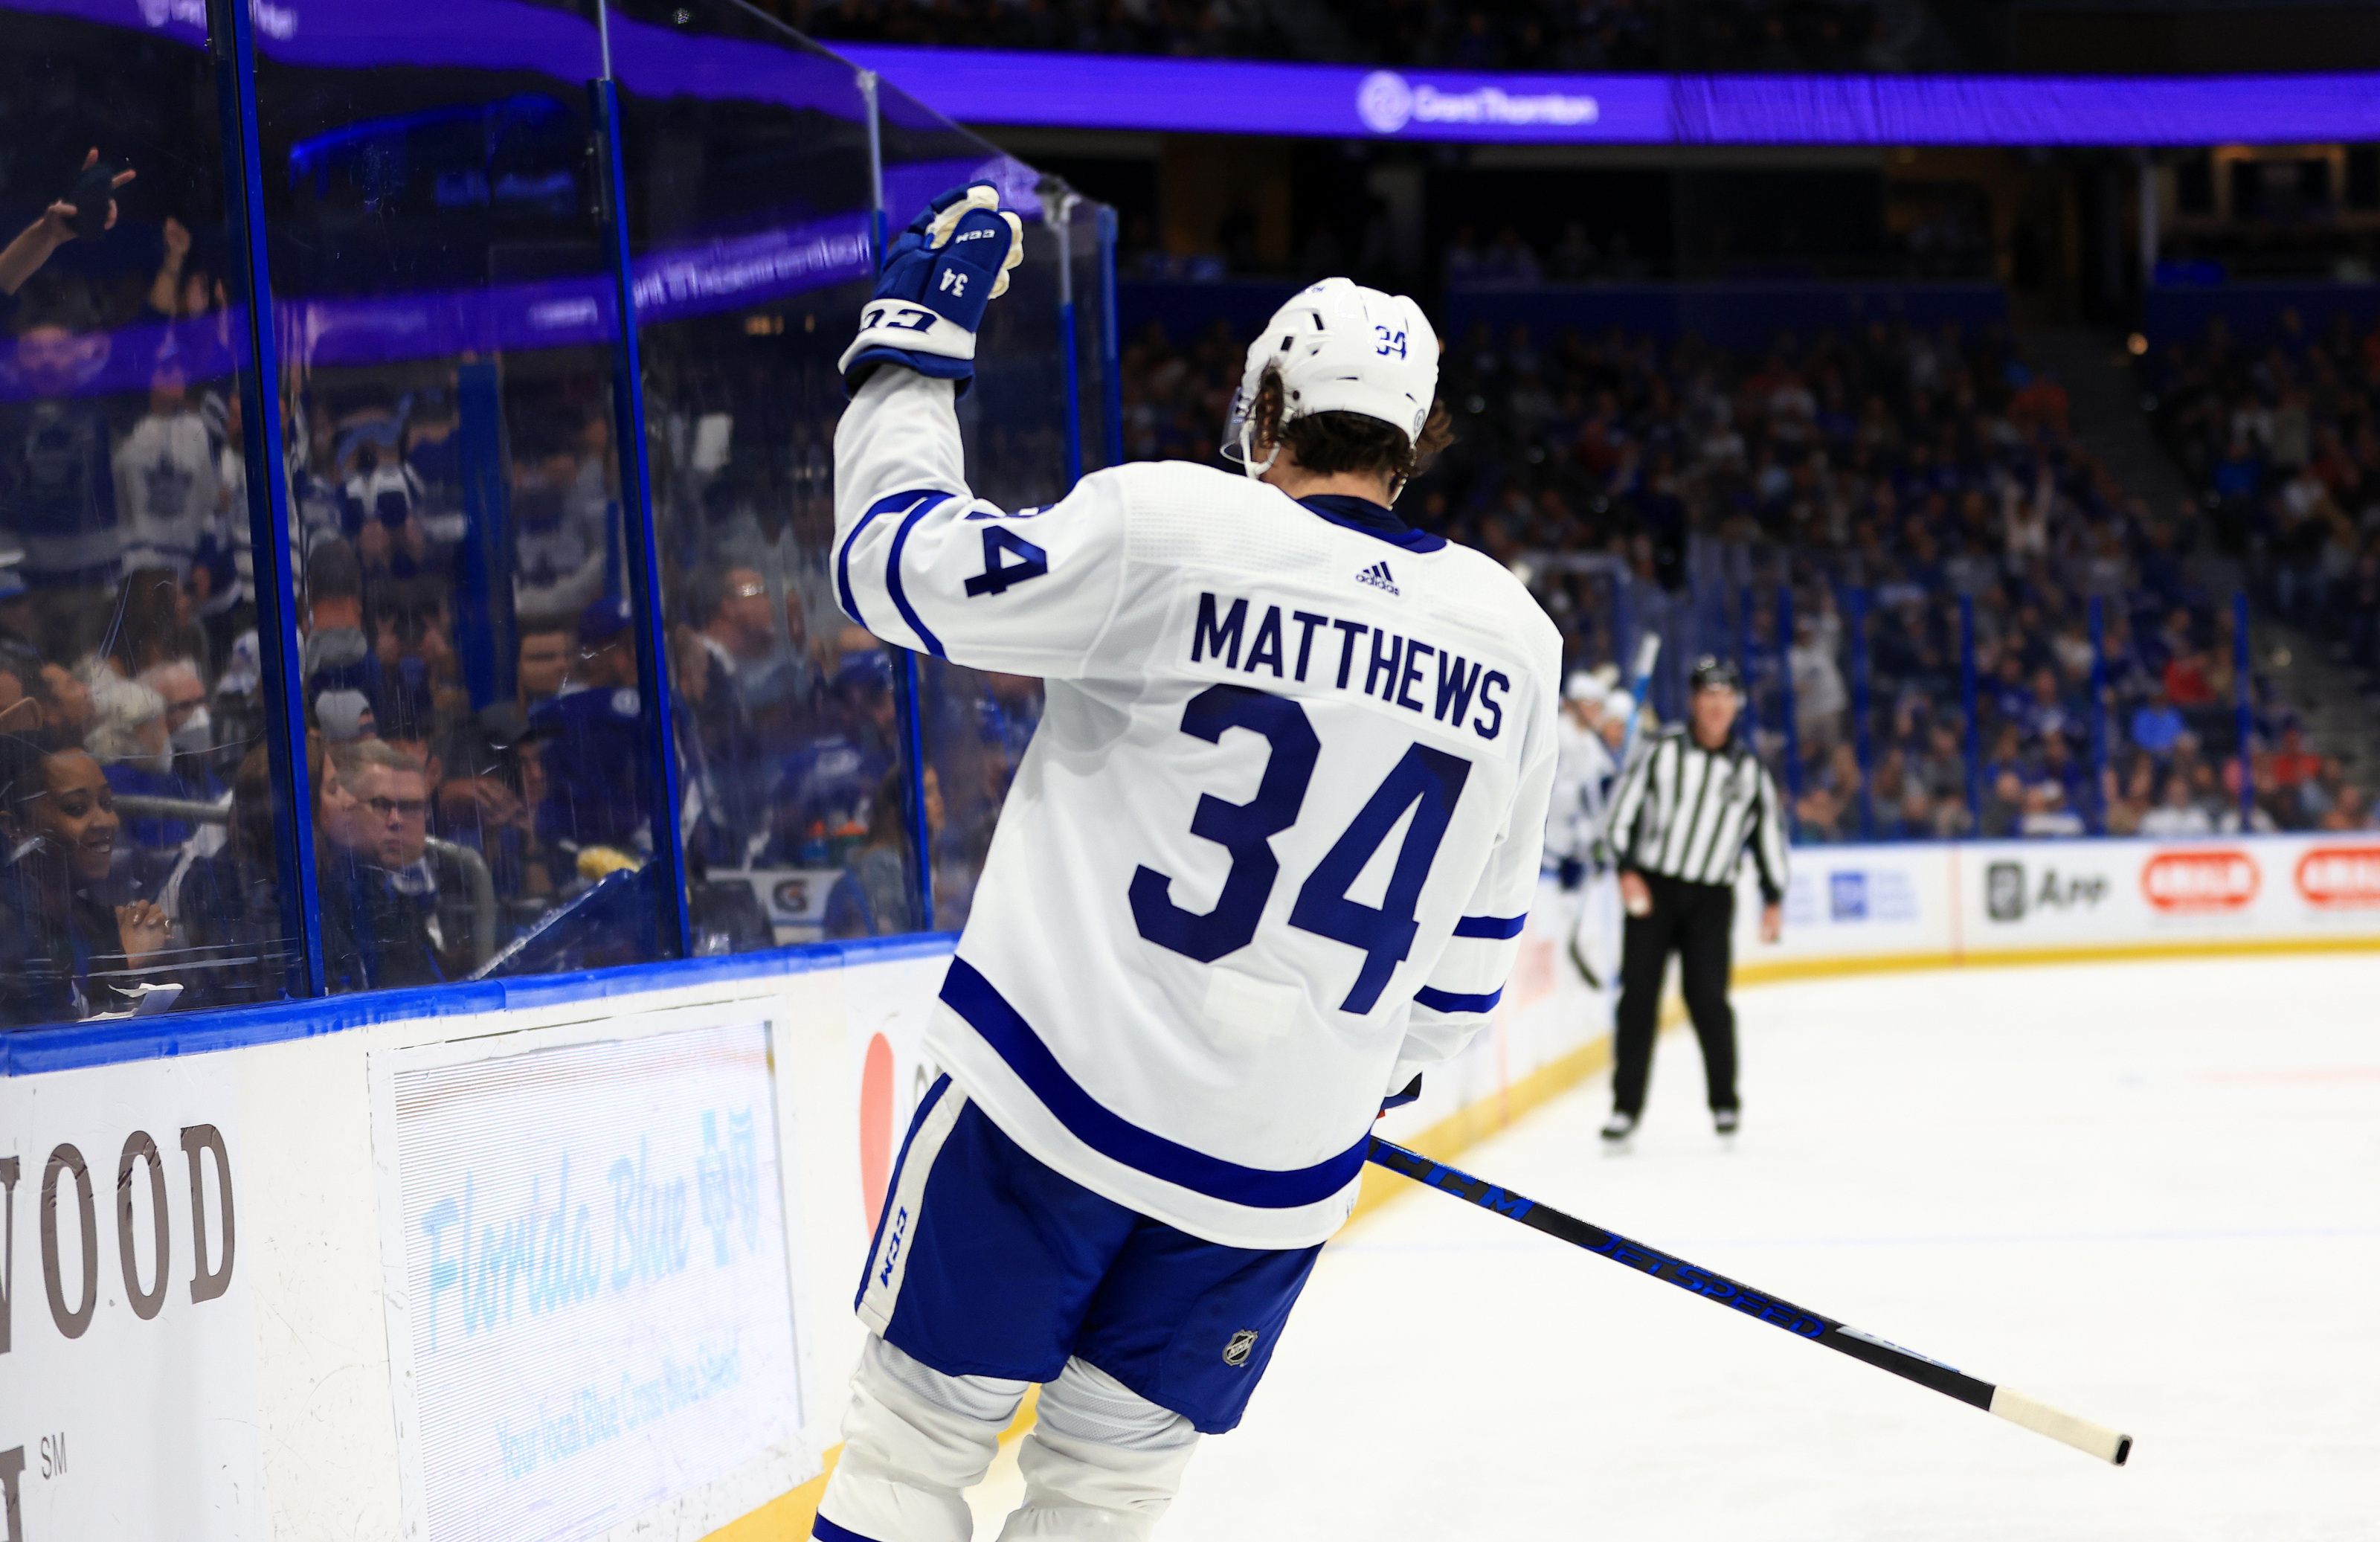 Eliteprospects.com - Toronto Maple Leafs star Auston Matthews has been on a  scoring tear, breaking the 50-goal mark for the first time in his career. •  Tampa Bay Lightning head coach Jon